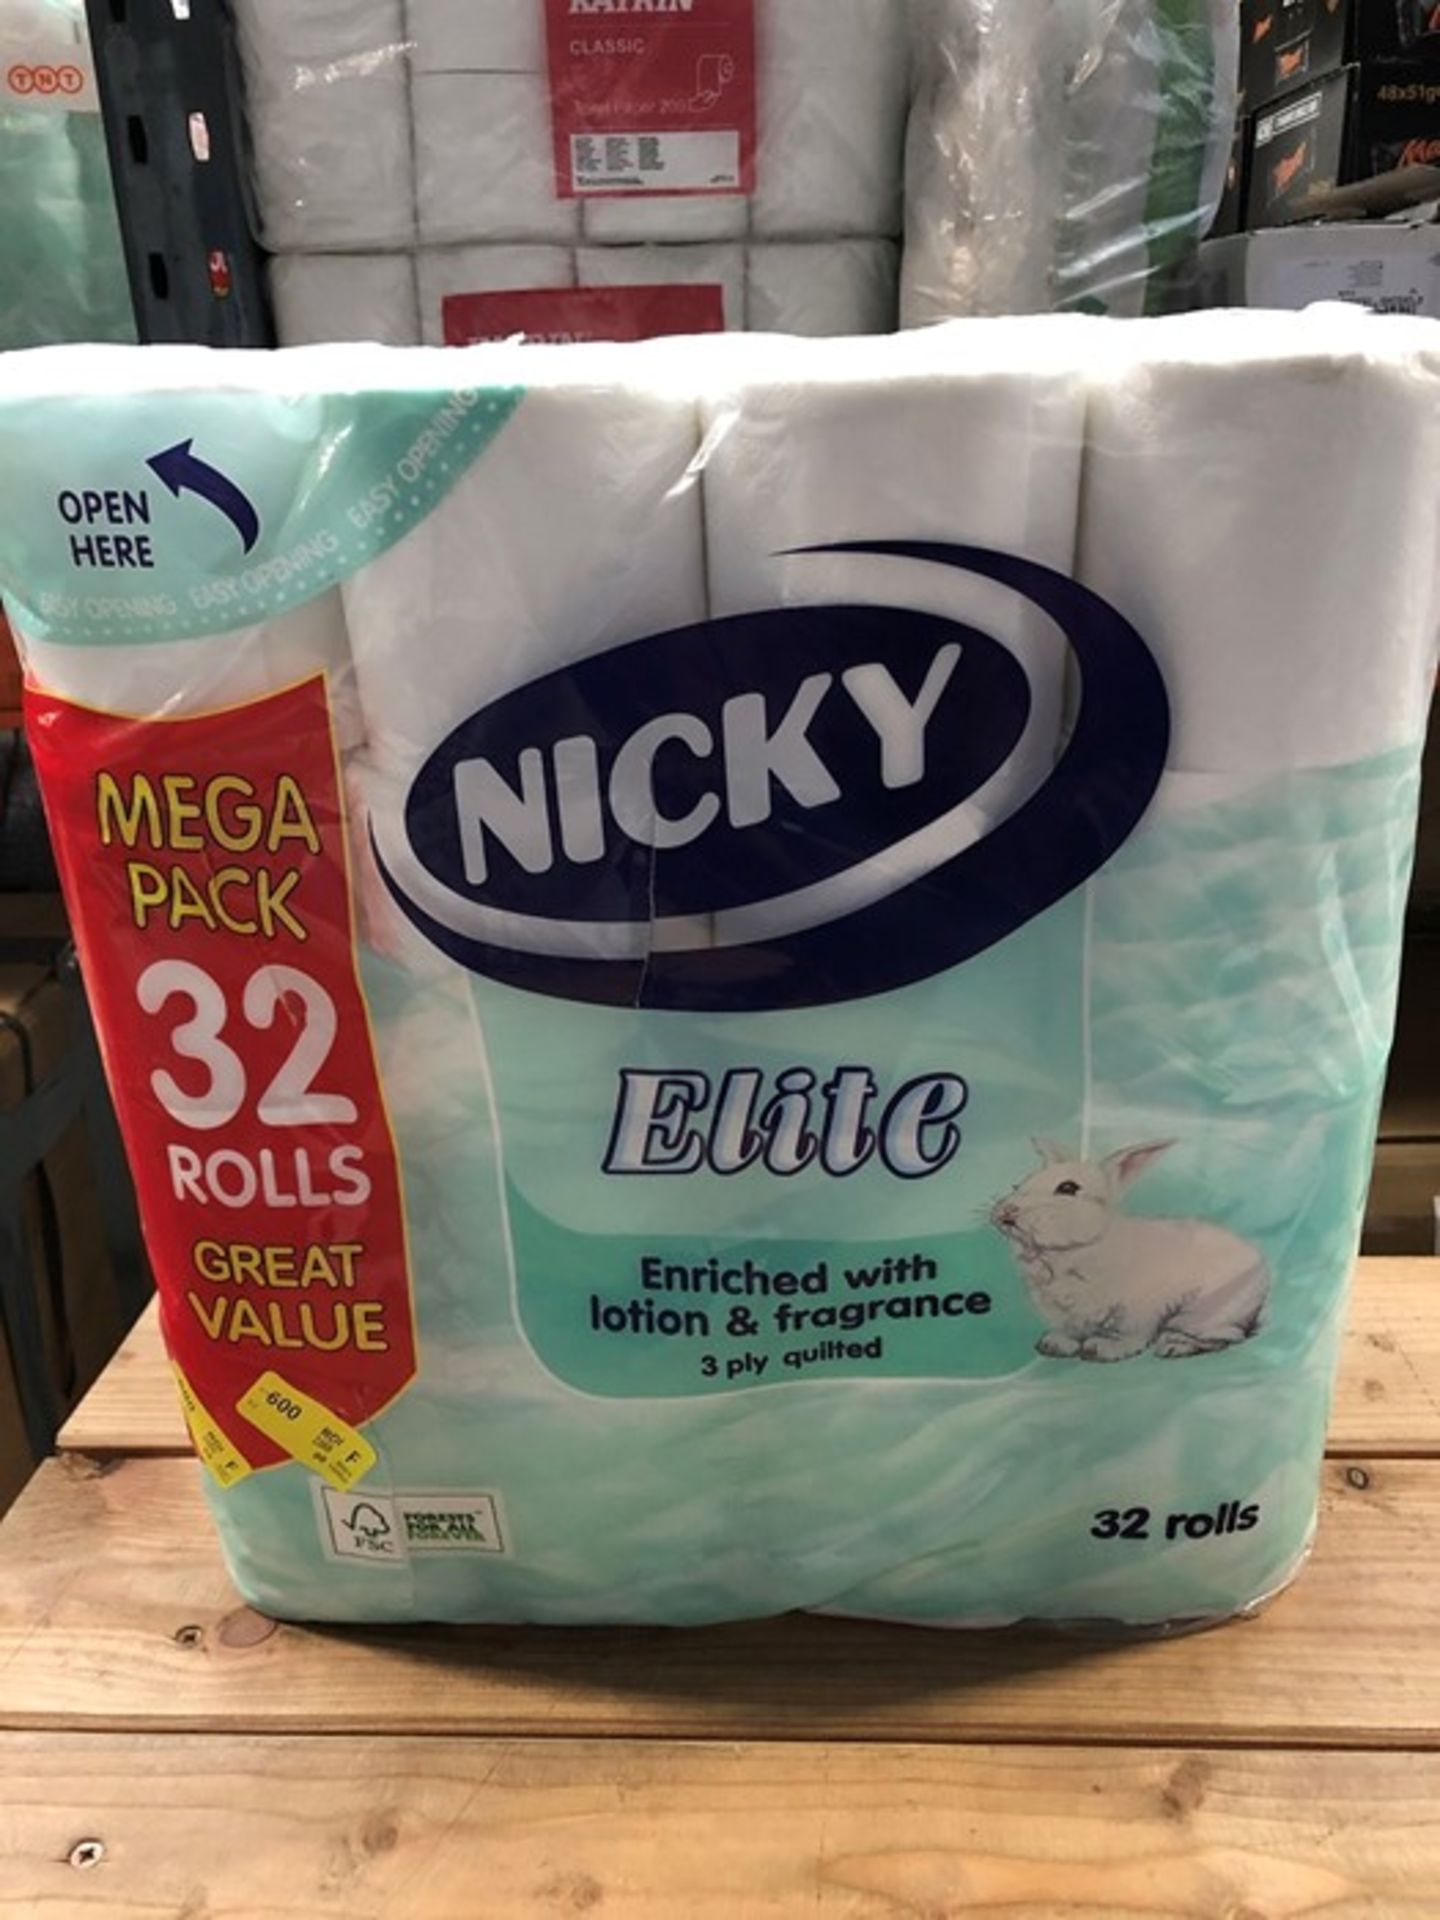 1 BAGGED SET CONTAINING 32 ROLLS OF NICKY ELITE TOILET PAPER